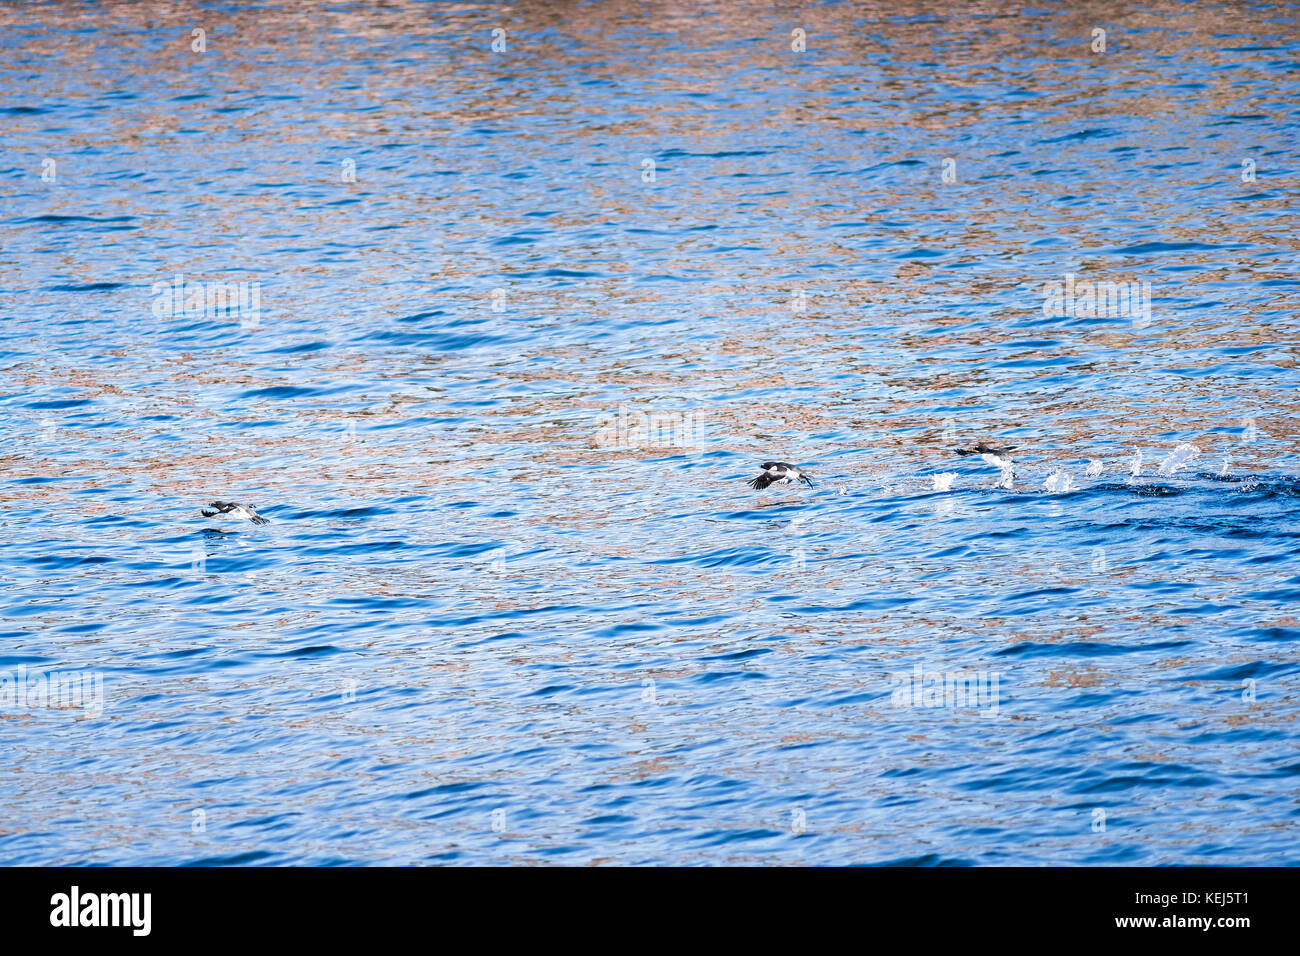 Three black guillemots birds diving, swimming and flying by water surface of ocean Stock Photo